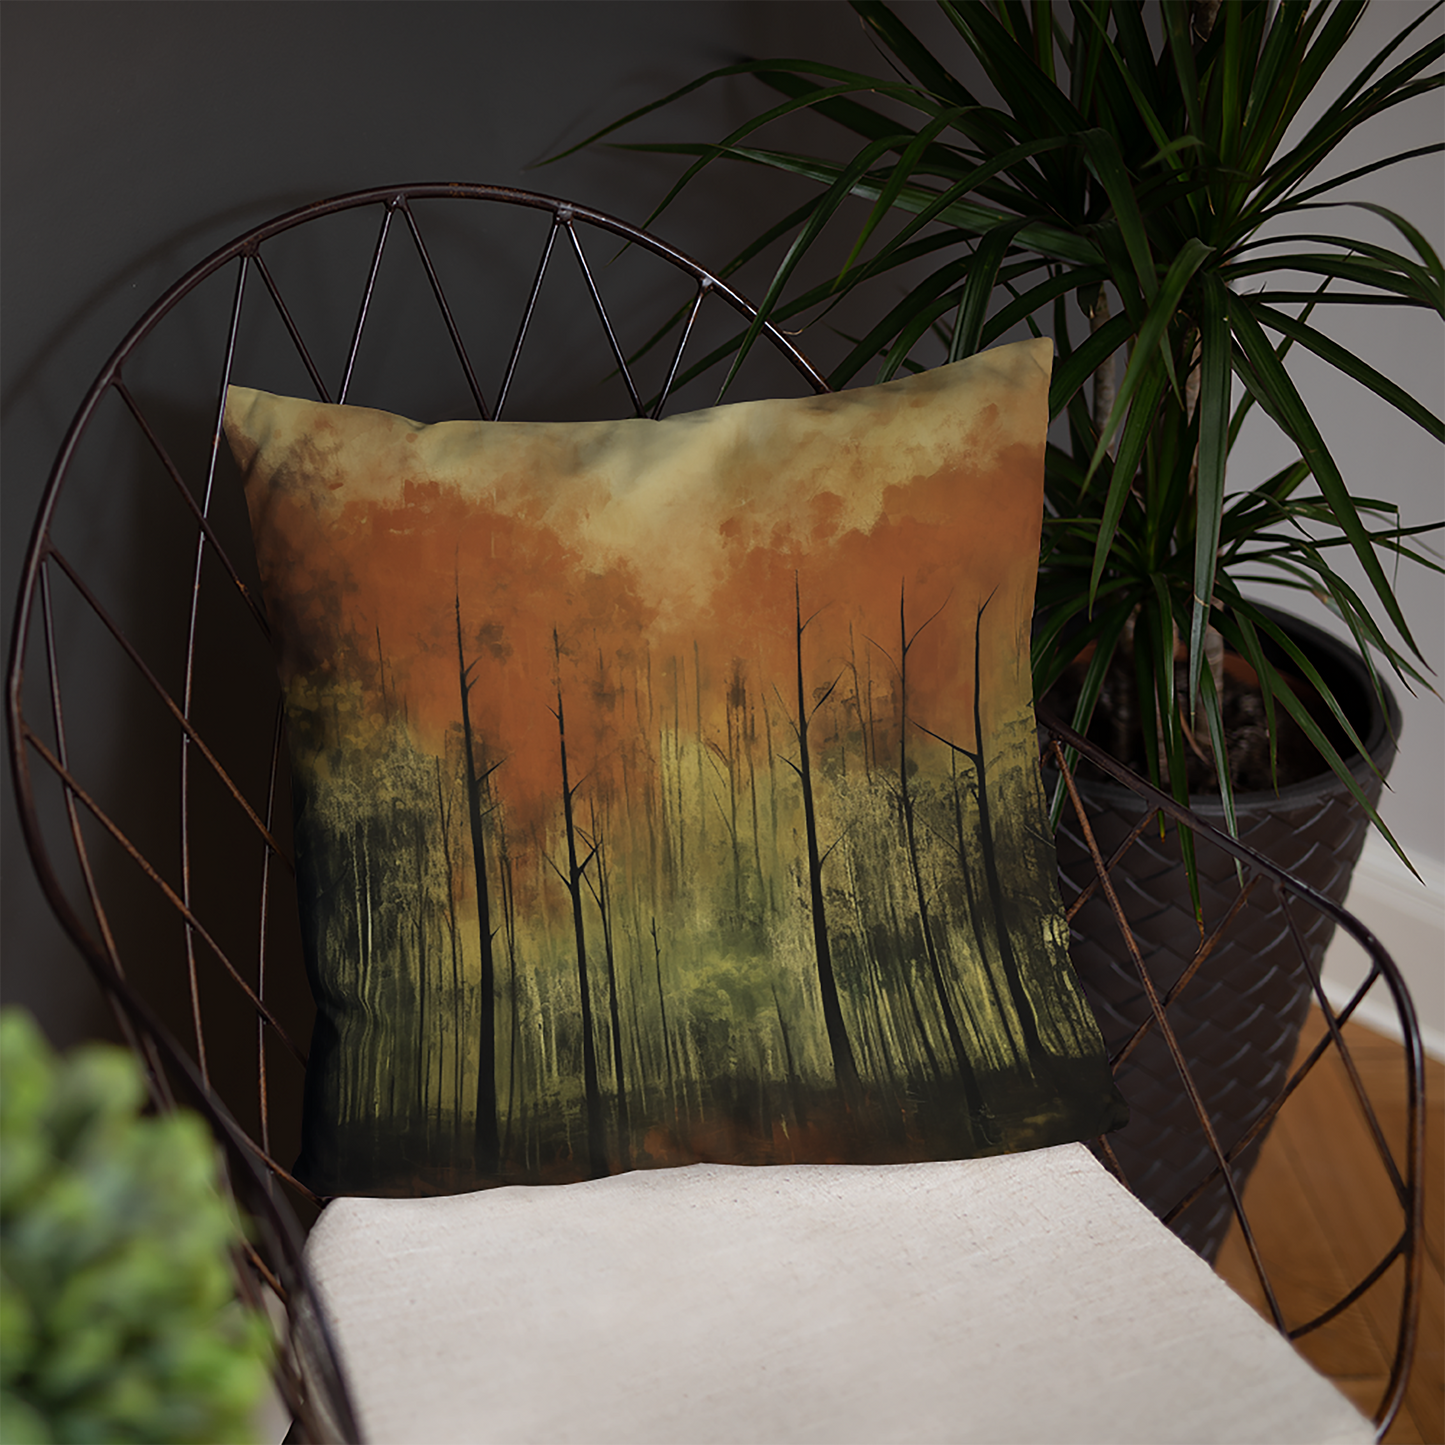 Abstract Throw Pillow Autumnal Landscape Polyester Decorative Cushion 18x18